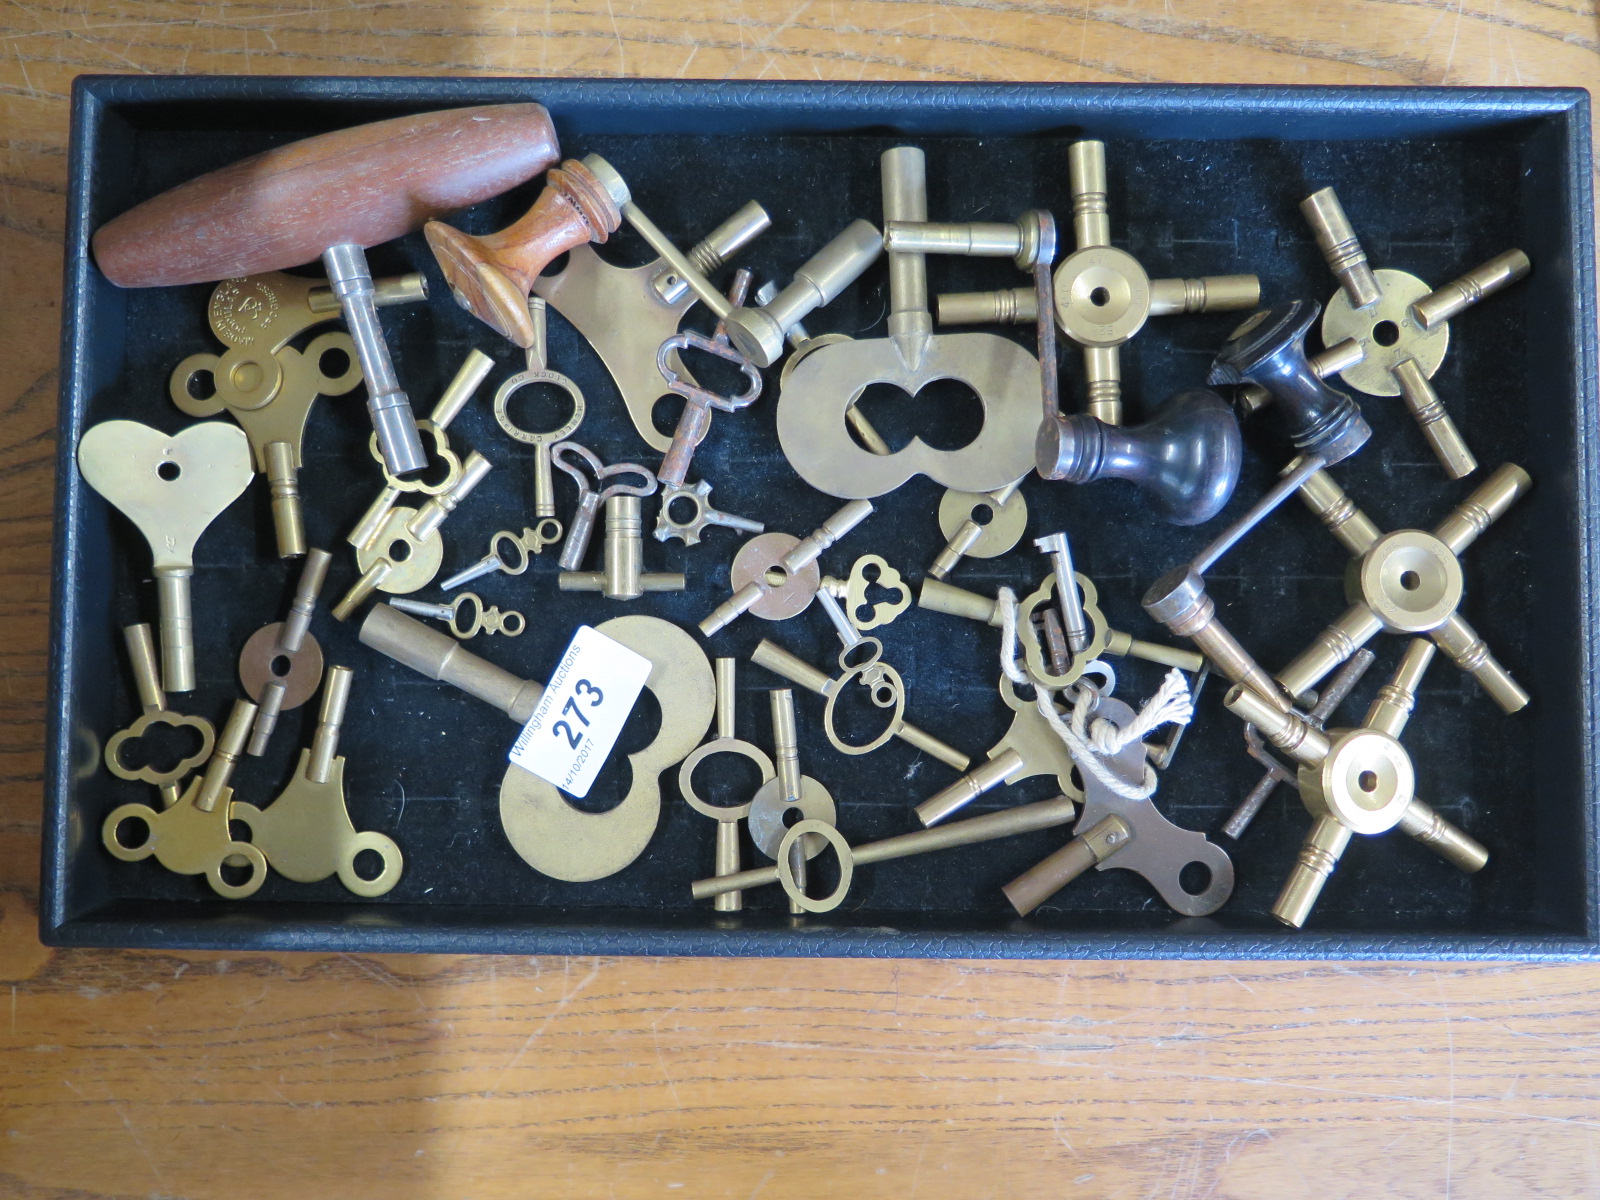 A good selection of clock and watch keys - approx 40 in total